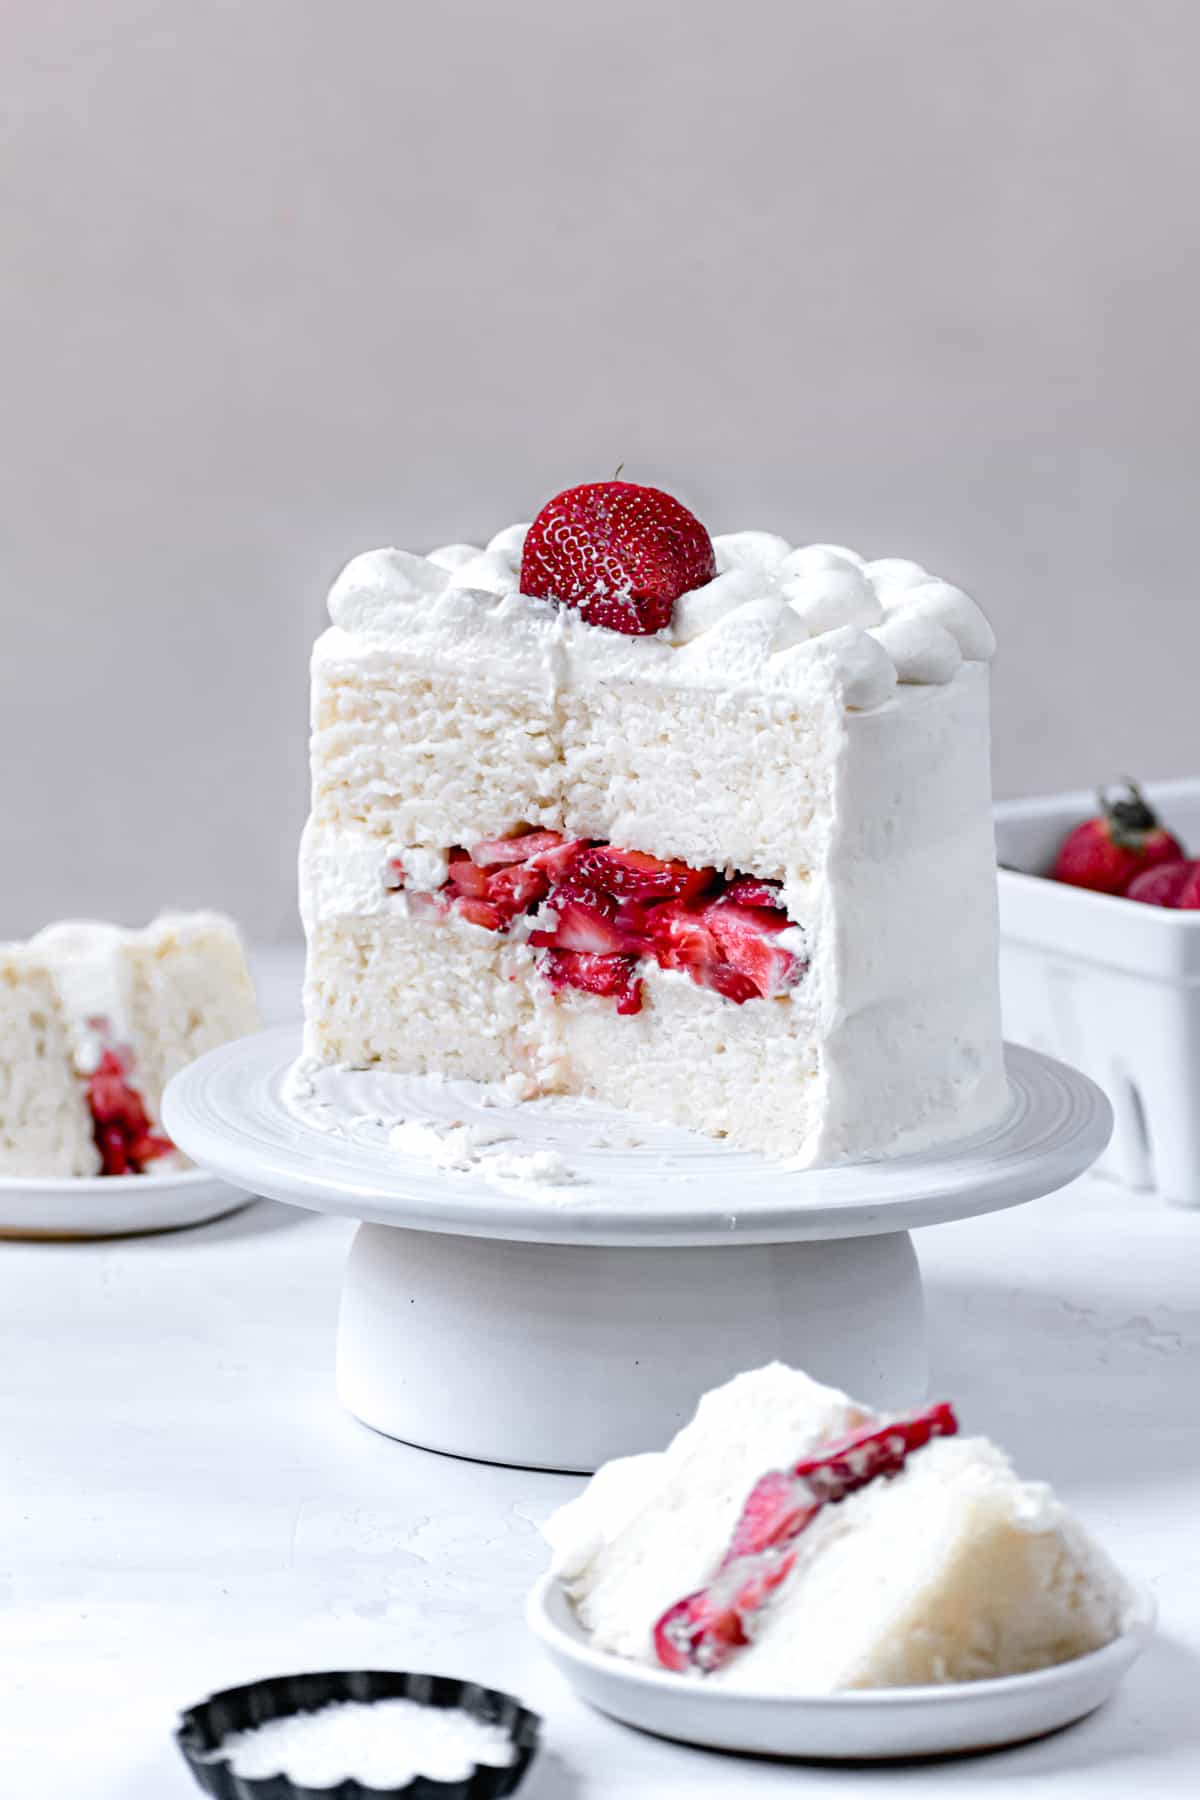 sliced cake on white cake stand to reveal texture of cake and fresh strawberry filling.